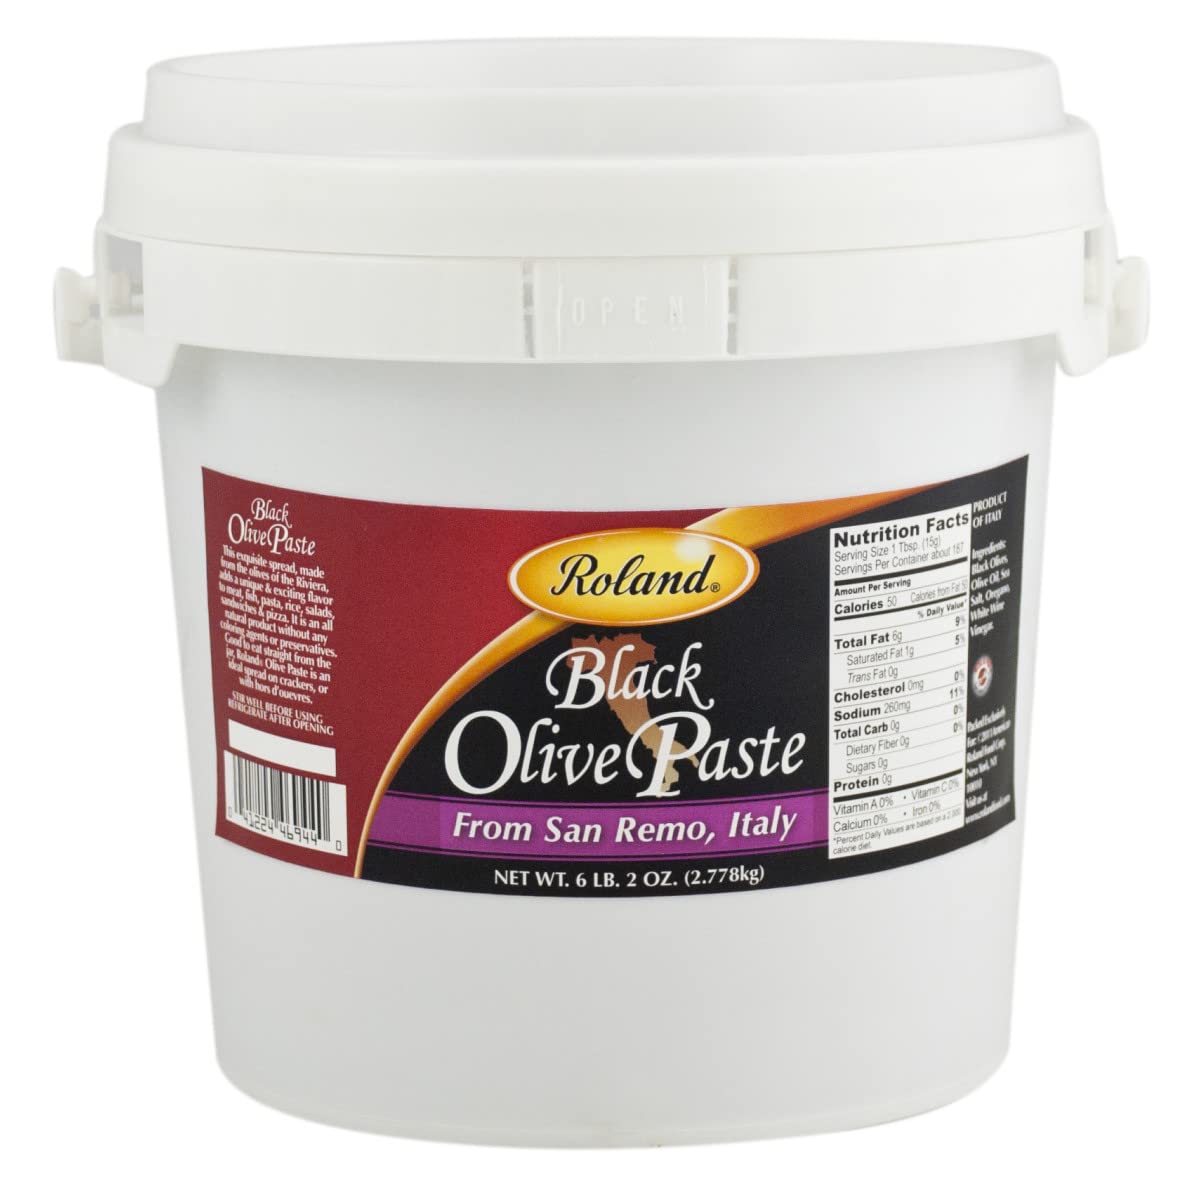 Roland Foods Black Olive Paste, Specialty Imported Food, 6 Lb 2 Oz Pail